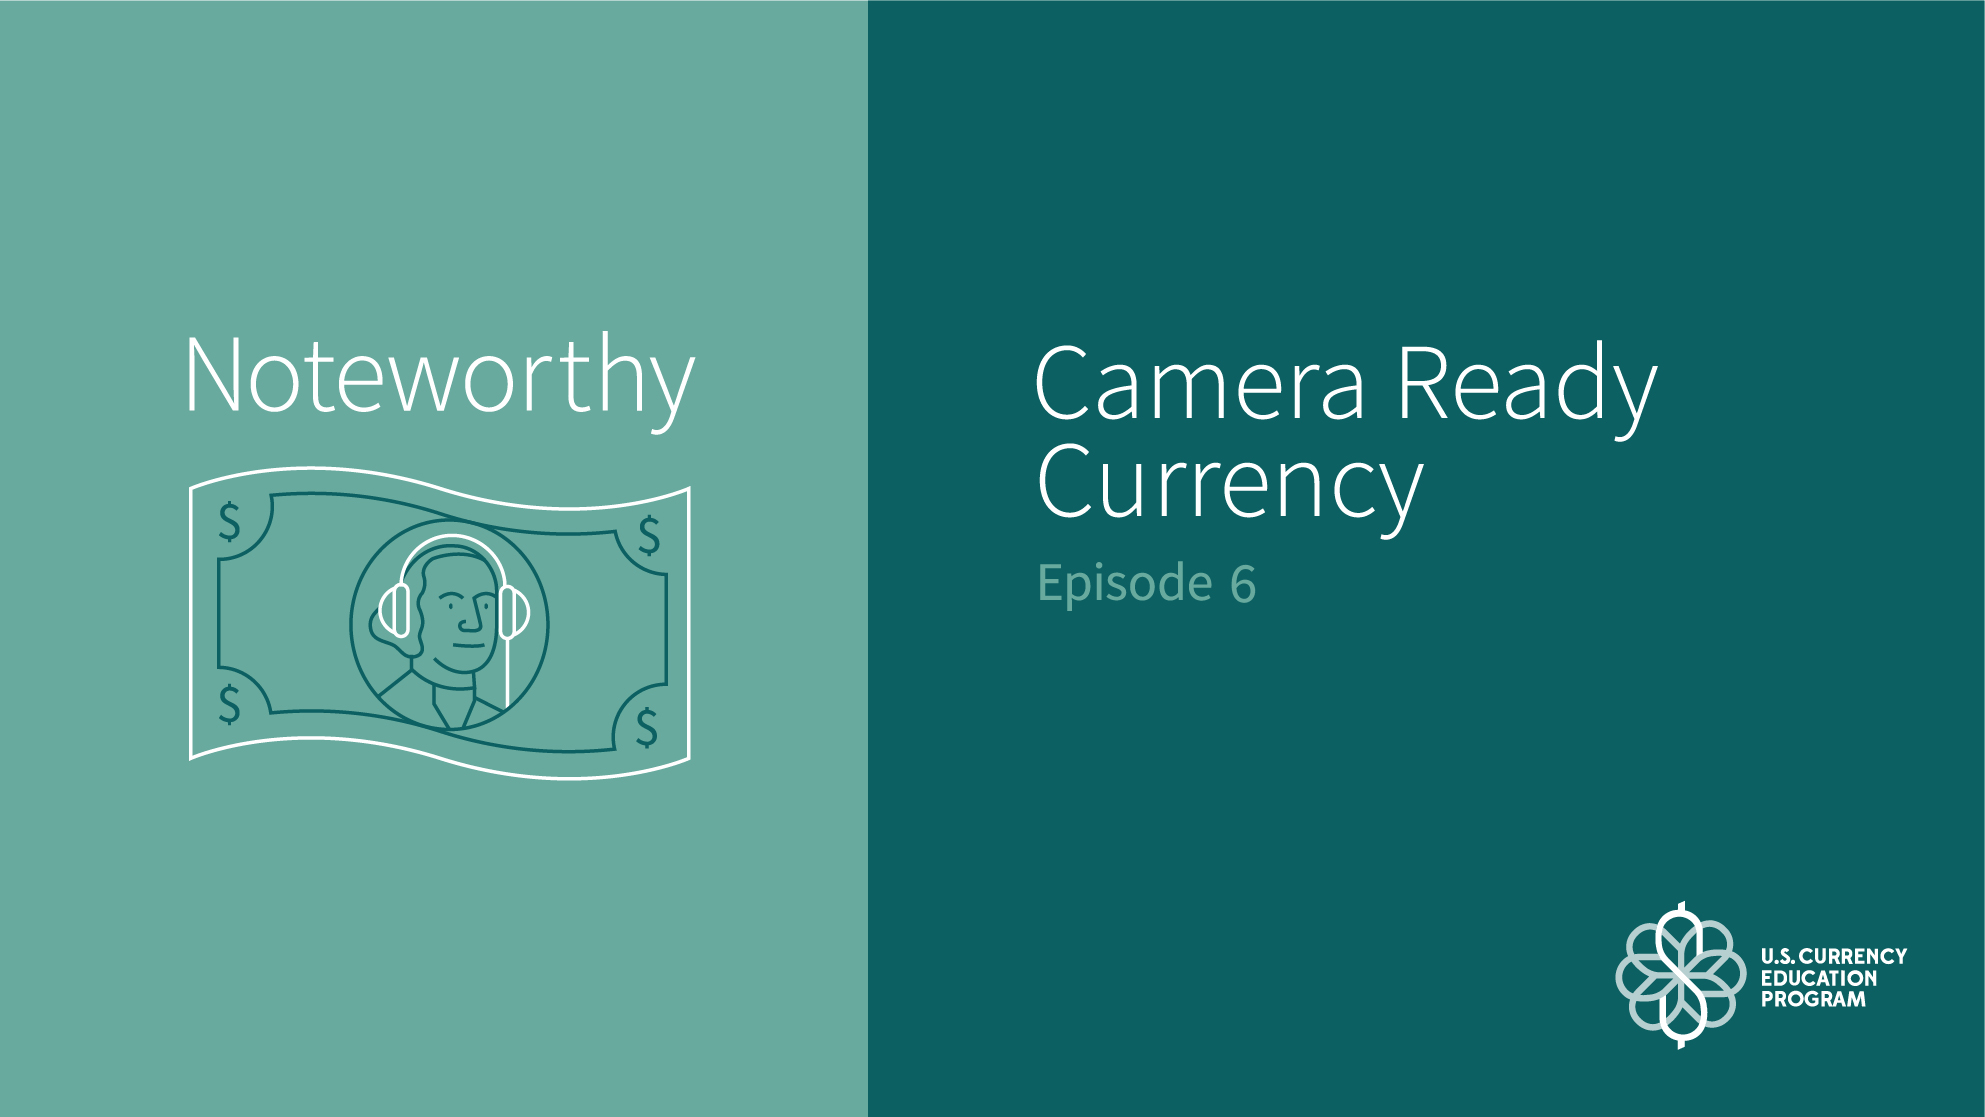 Camera Ready Currency